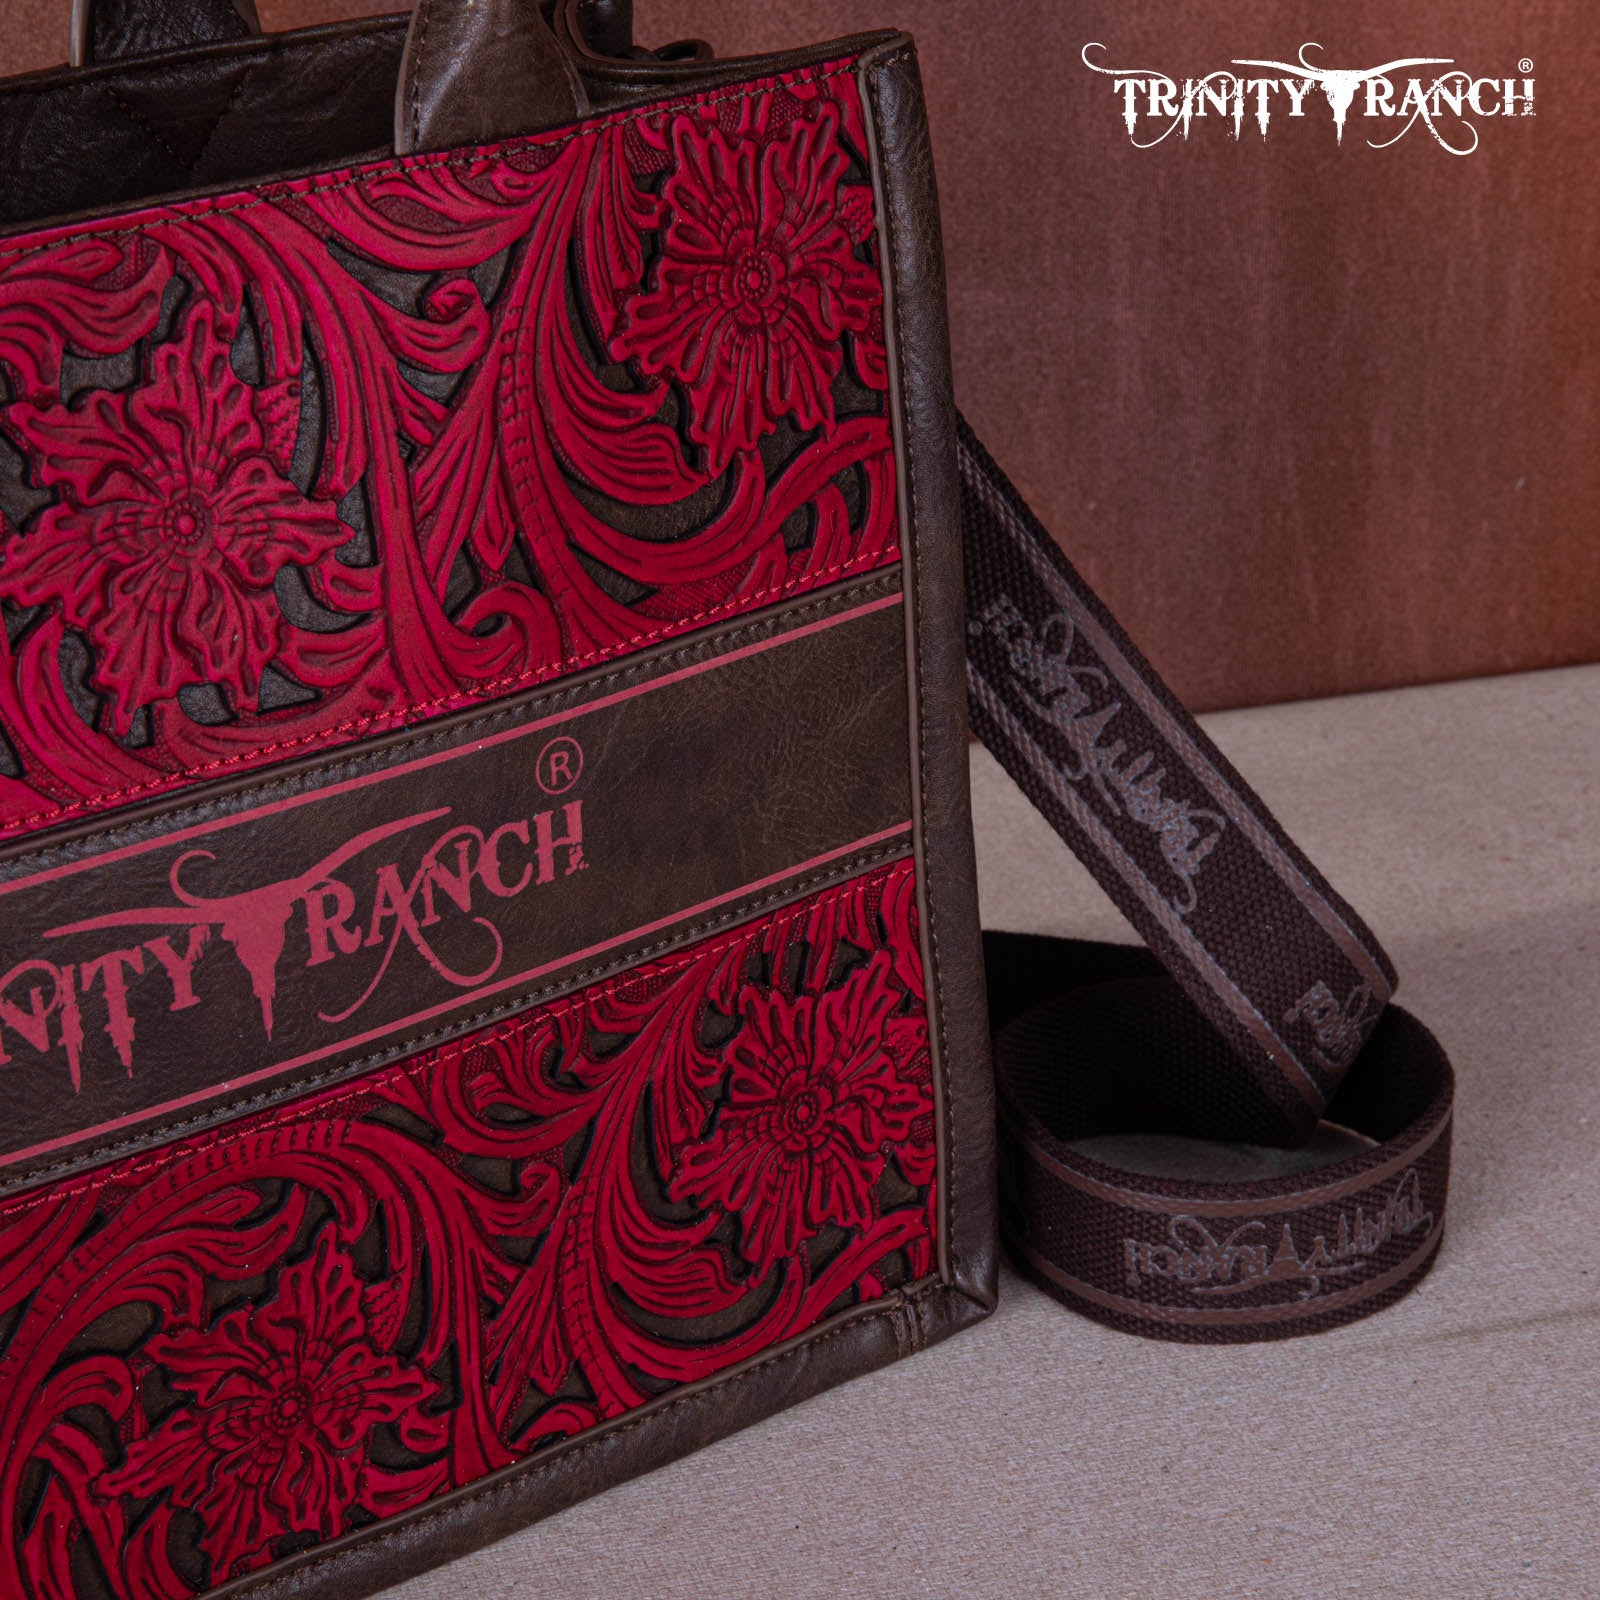 Trinity Ranch Tooled Concealed Carry Tote